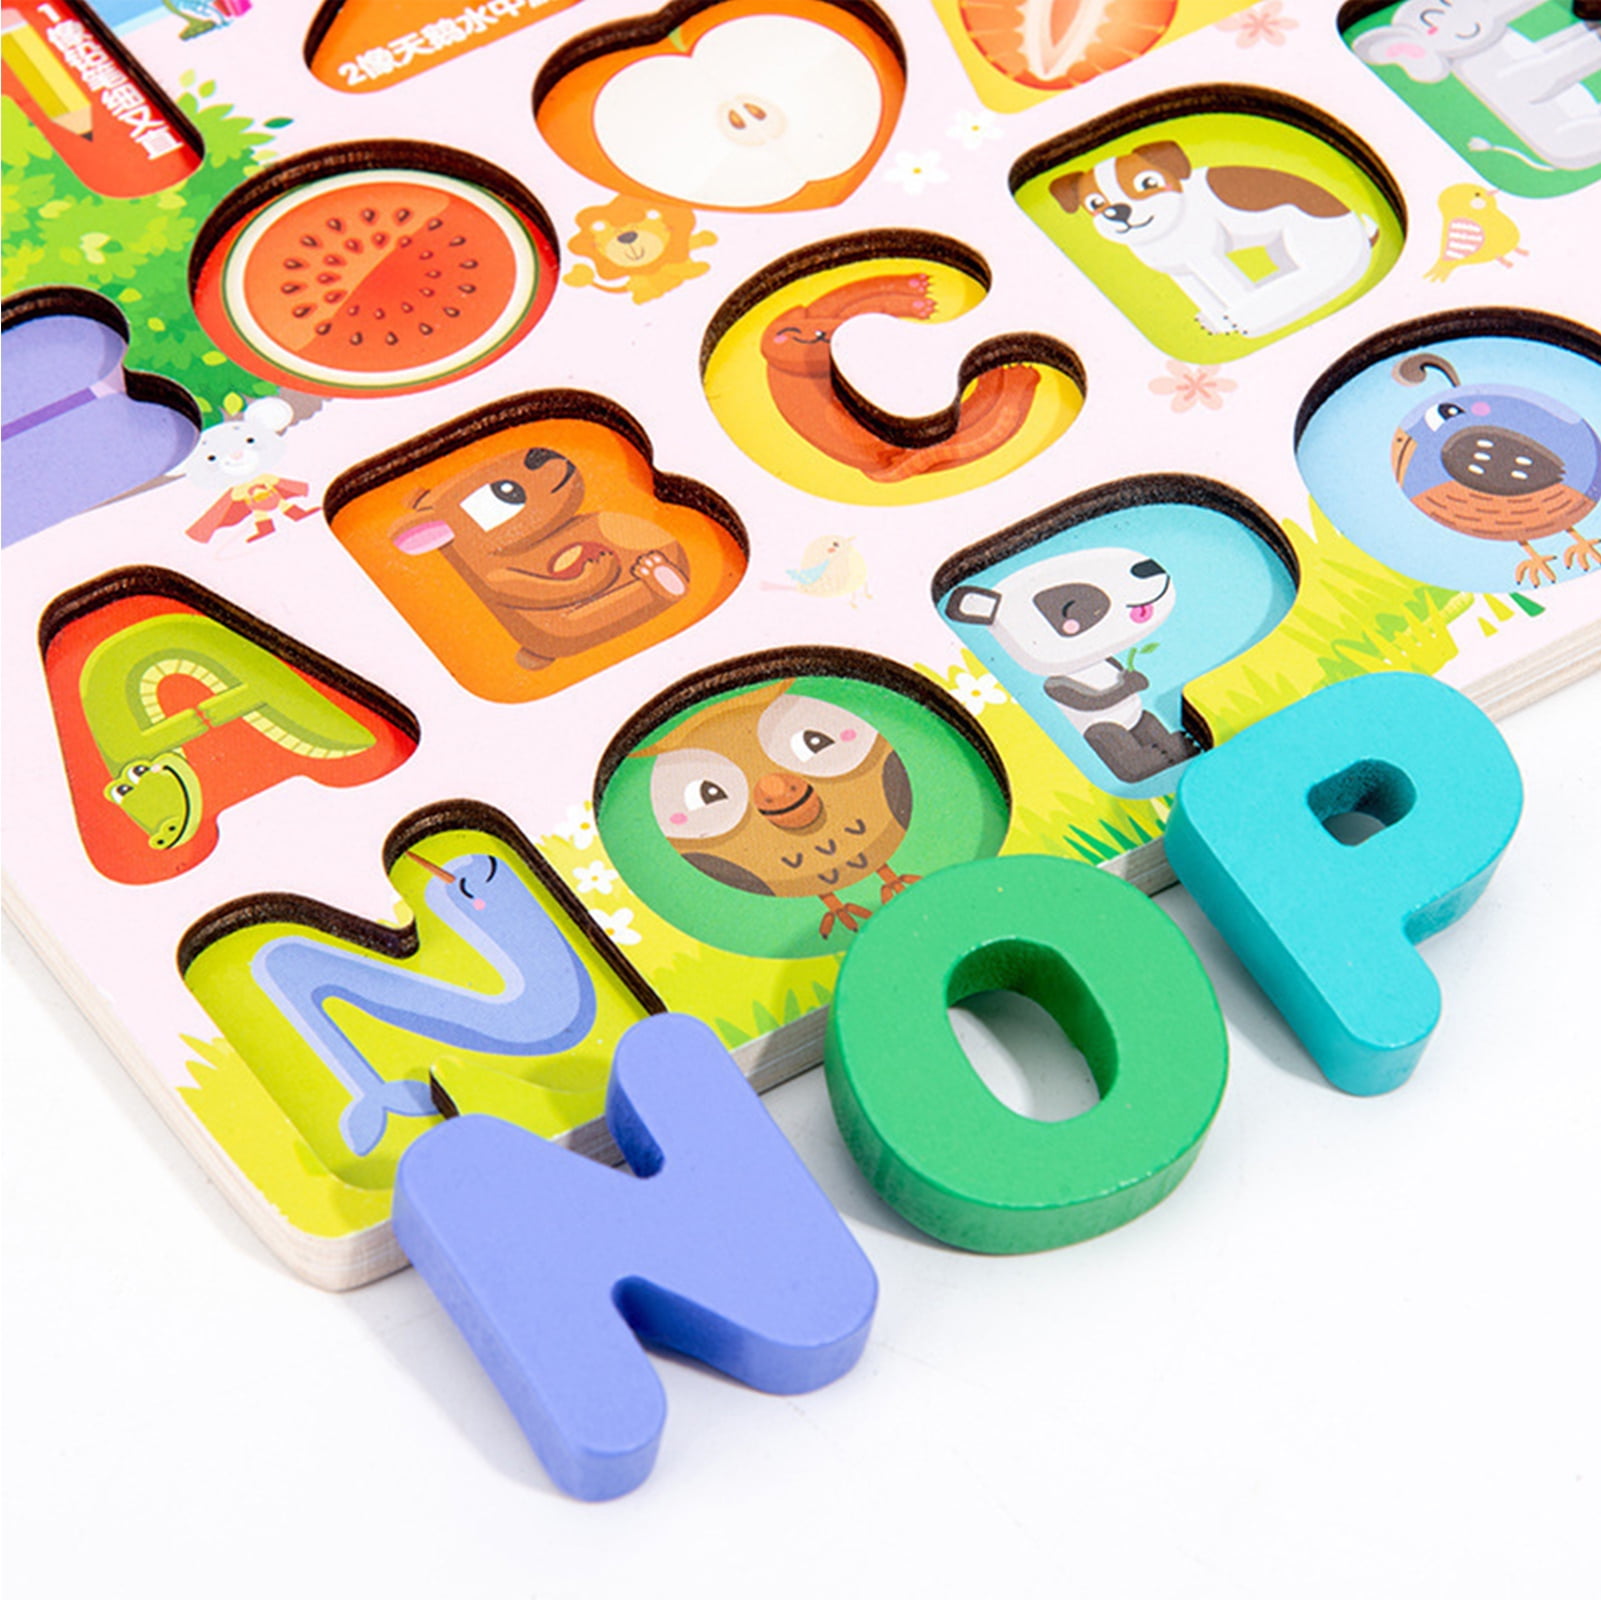 Abanopi Wooden Number Puzzle Shape Sorter Counting & Matching Game